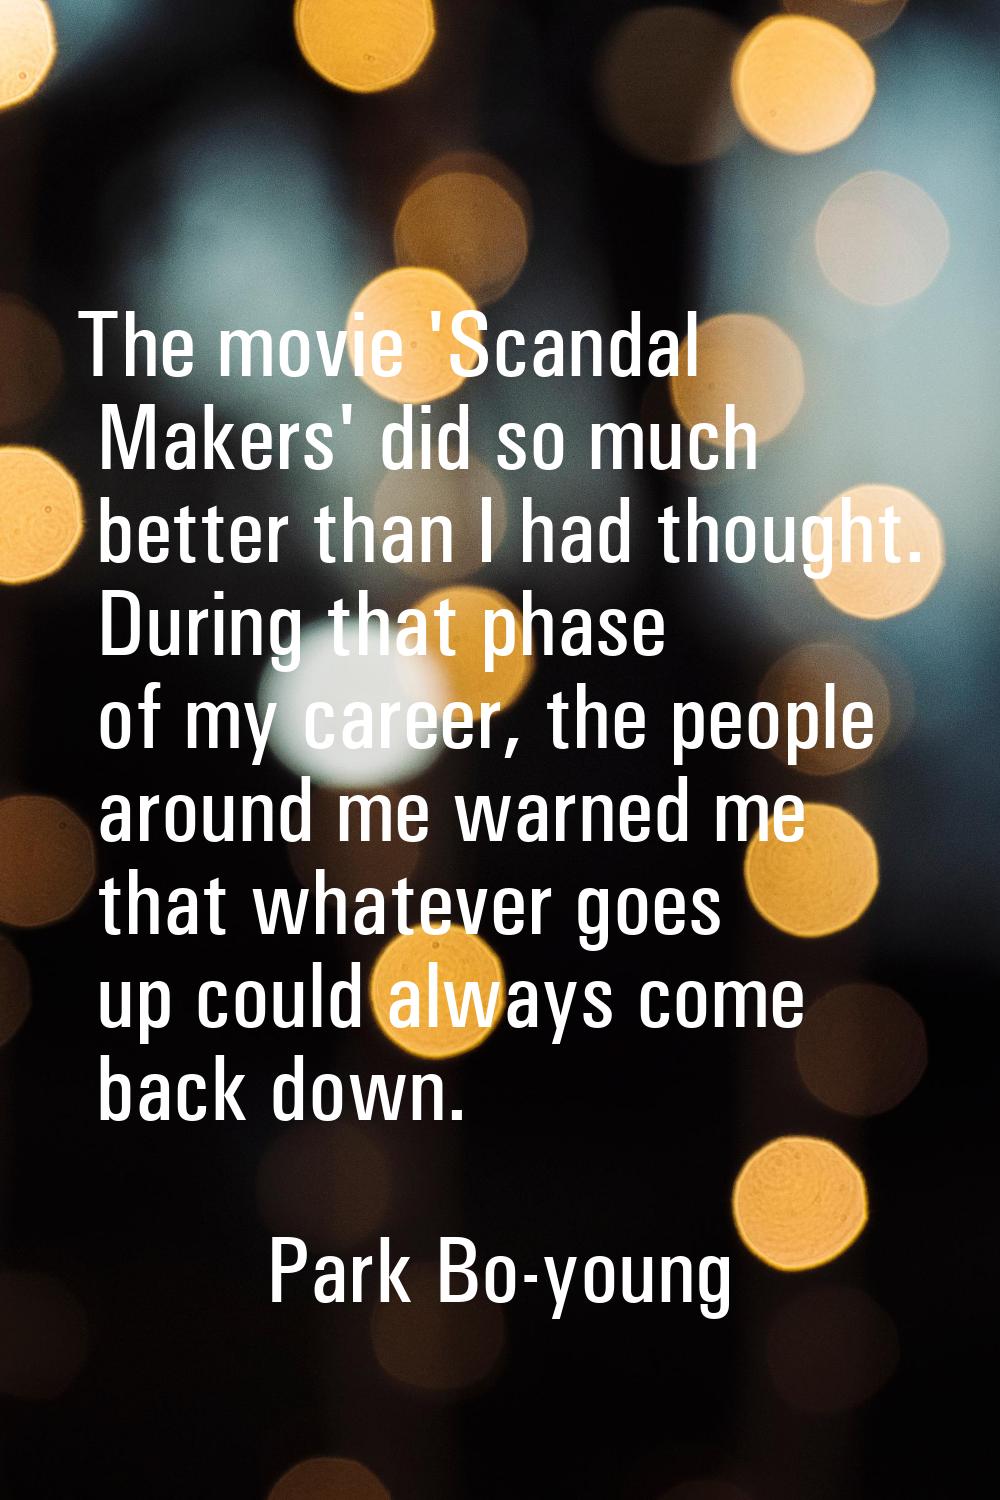 The movie 'Scandal Makers' did so much better than I had thought. During that phase of my career, t